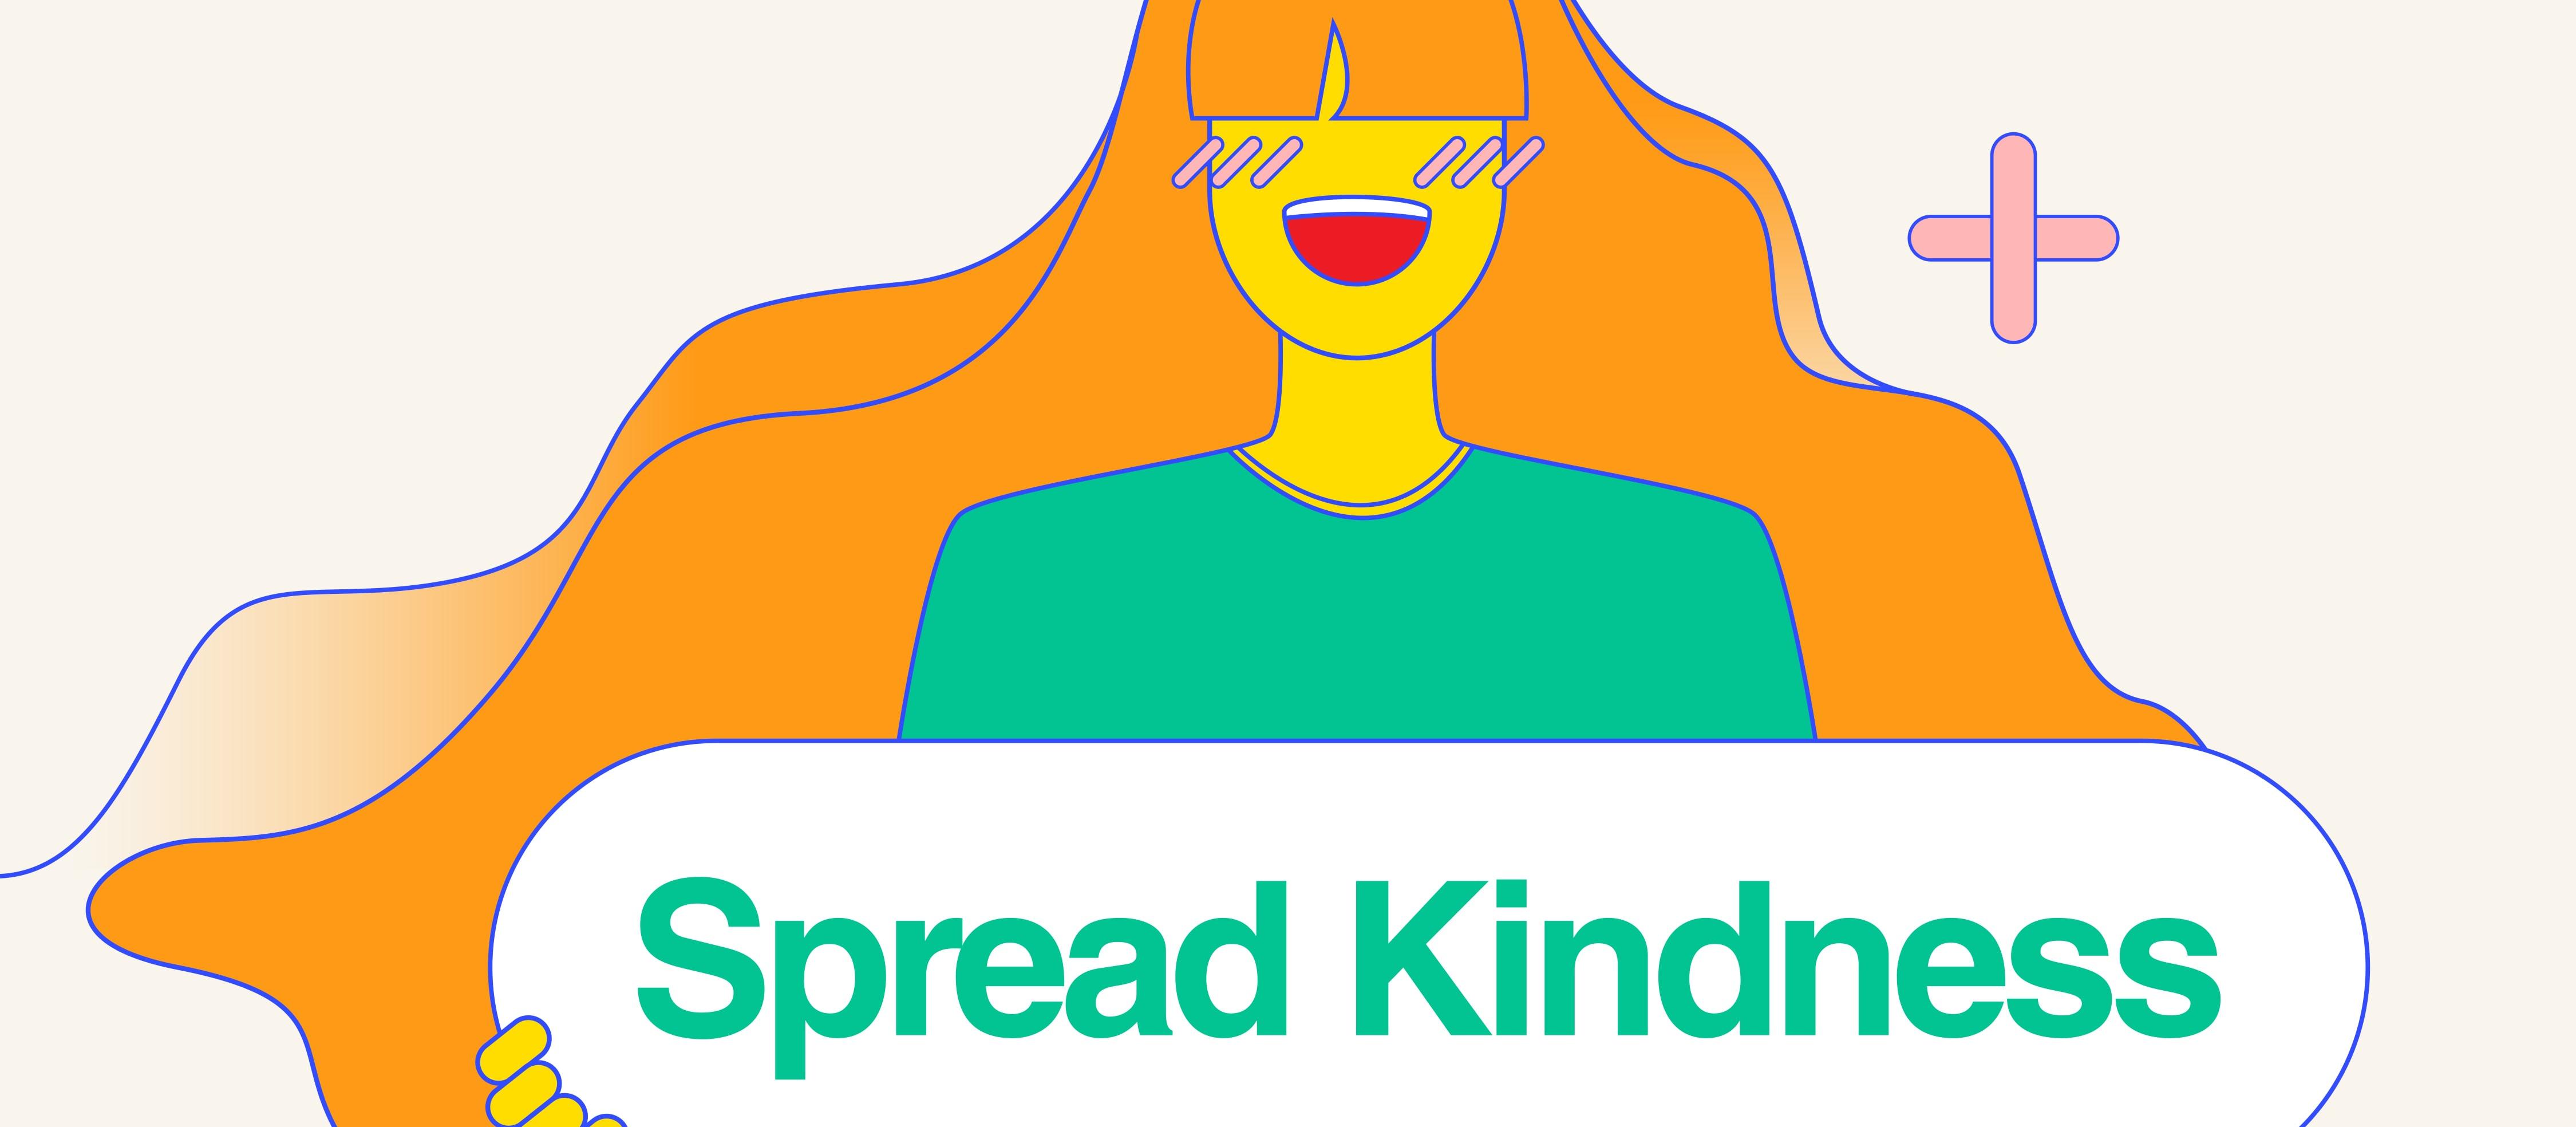 Spread Kindness Image created by Tracy Chen. Submitted for United Nations Global Call Out To Creatives